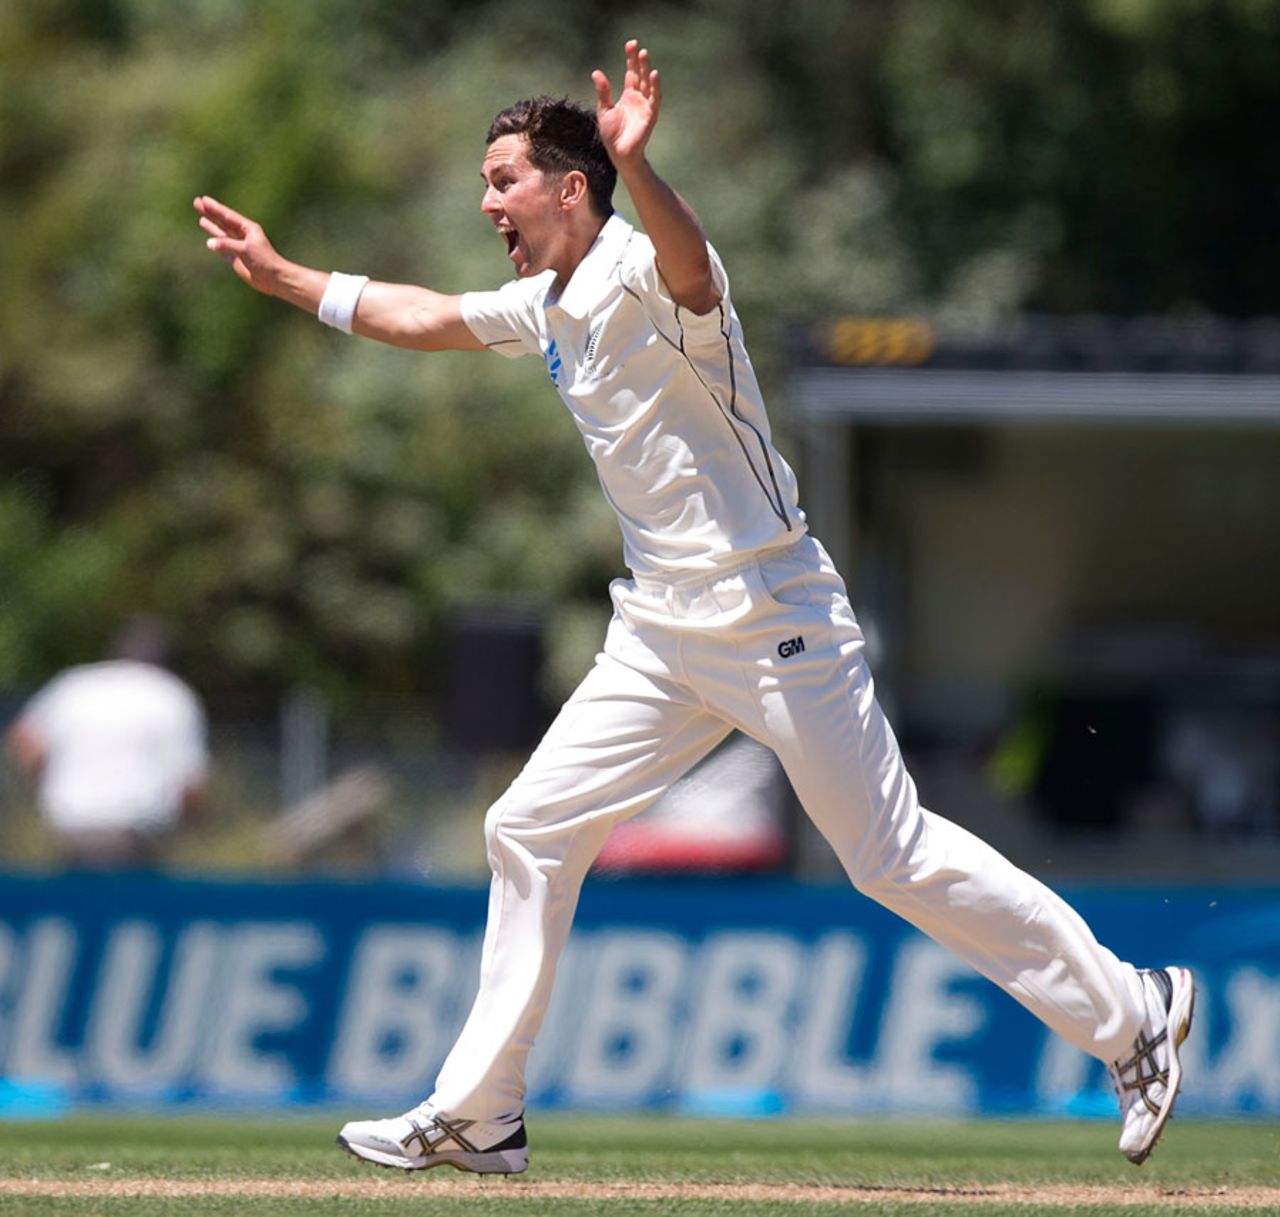 Trent Boult is ecstatic after picking up a wicket, New Zealand v West Indies, 1st Test, Dunedin, 3rd day, December 5, 2013